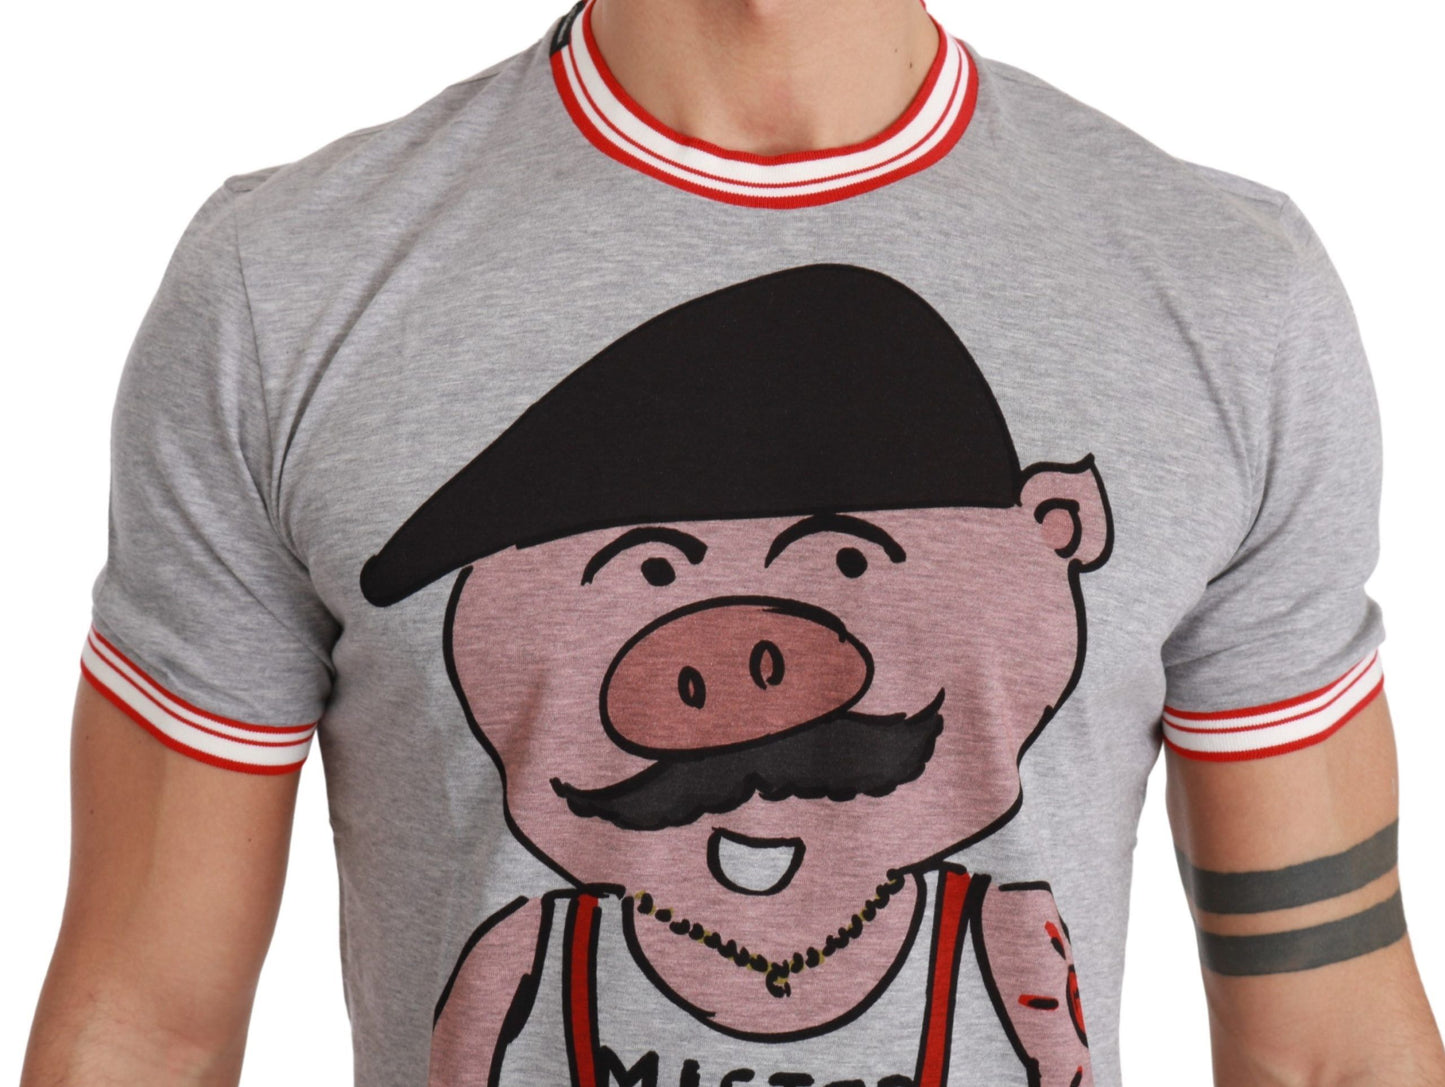 Dolce & Gabbana Gray Cotton Top 2019 Year of the Pig T-shirt